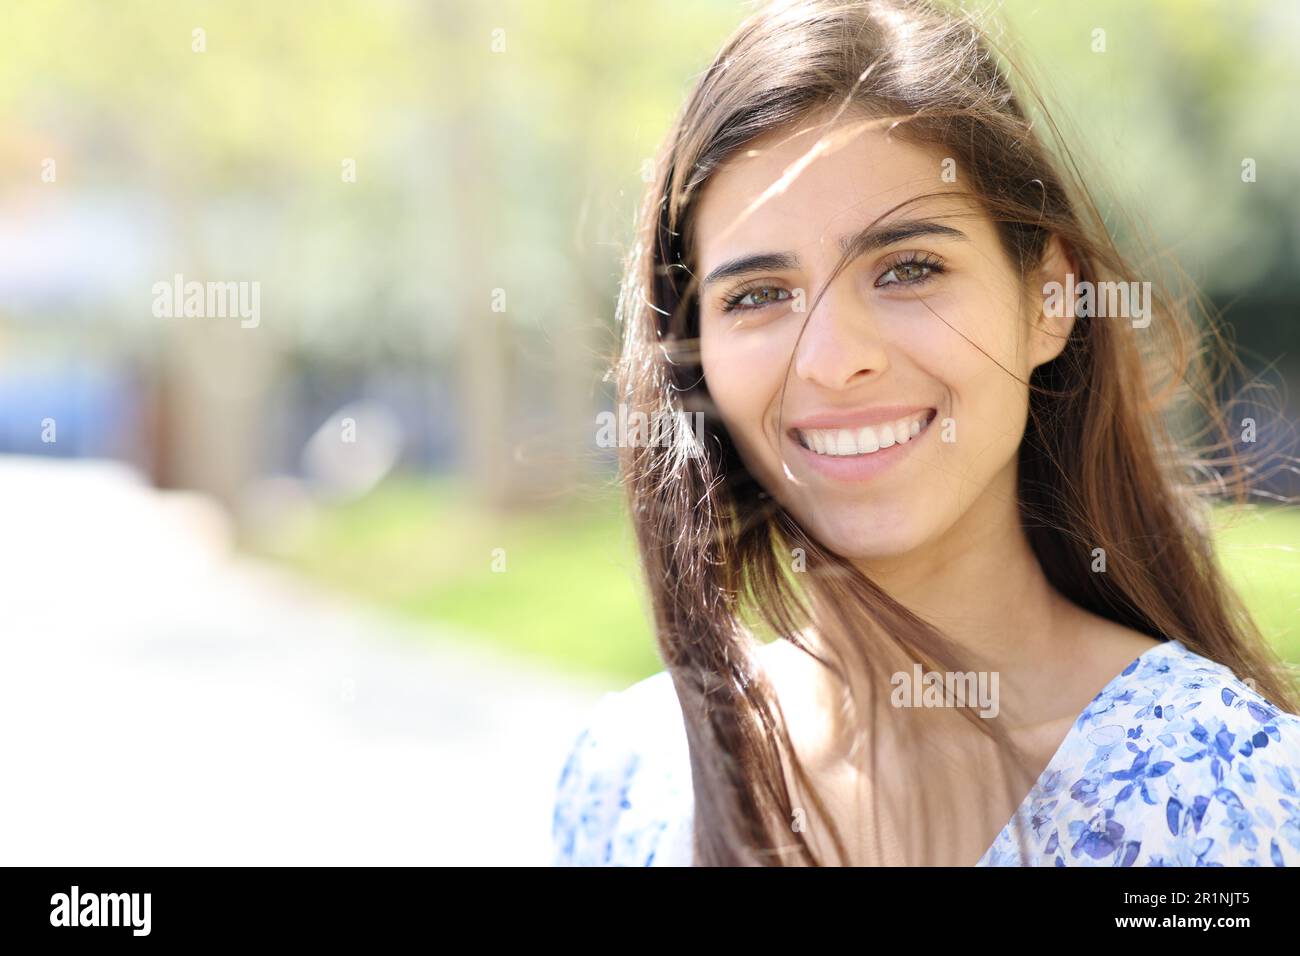 Happy woman with tousled hair looks at you in the street Stock Photo